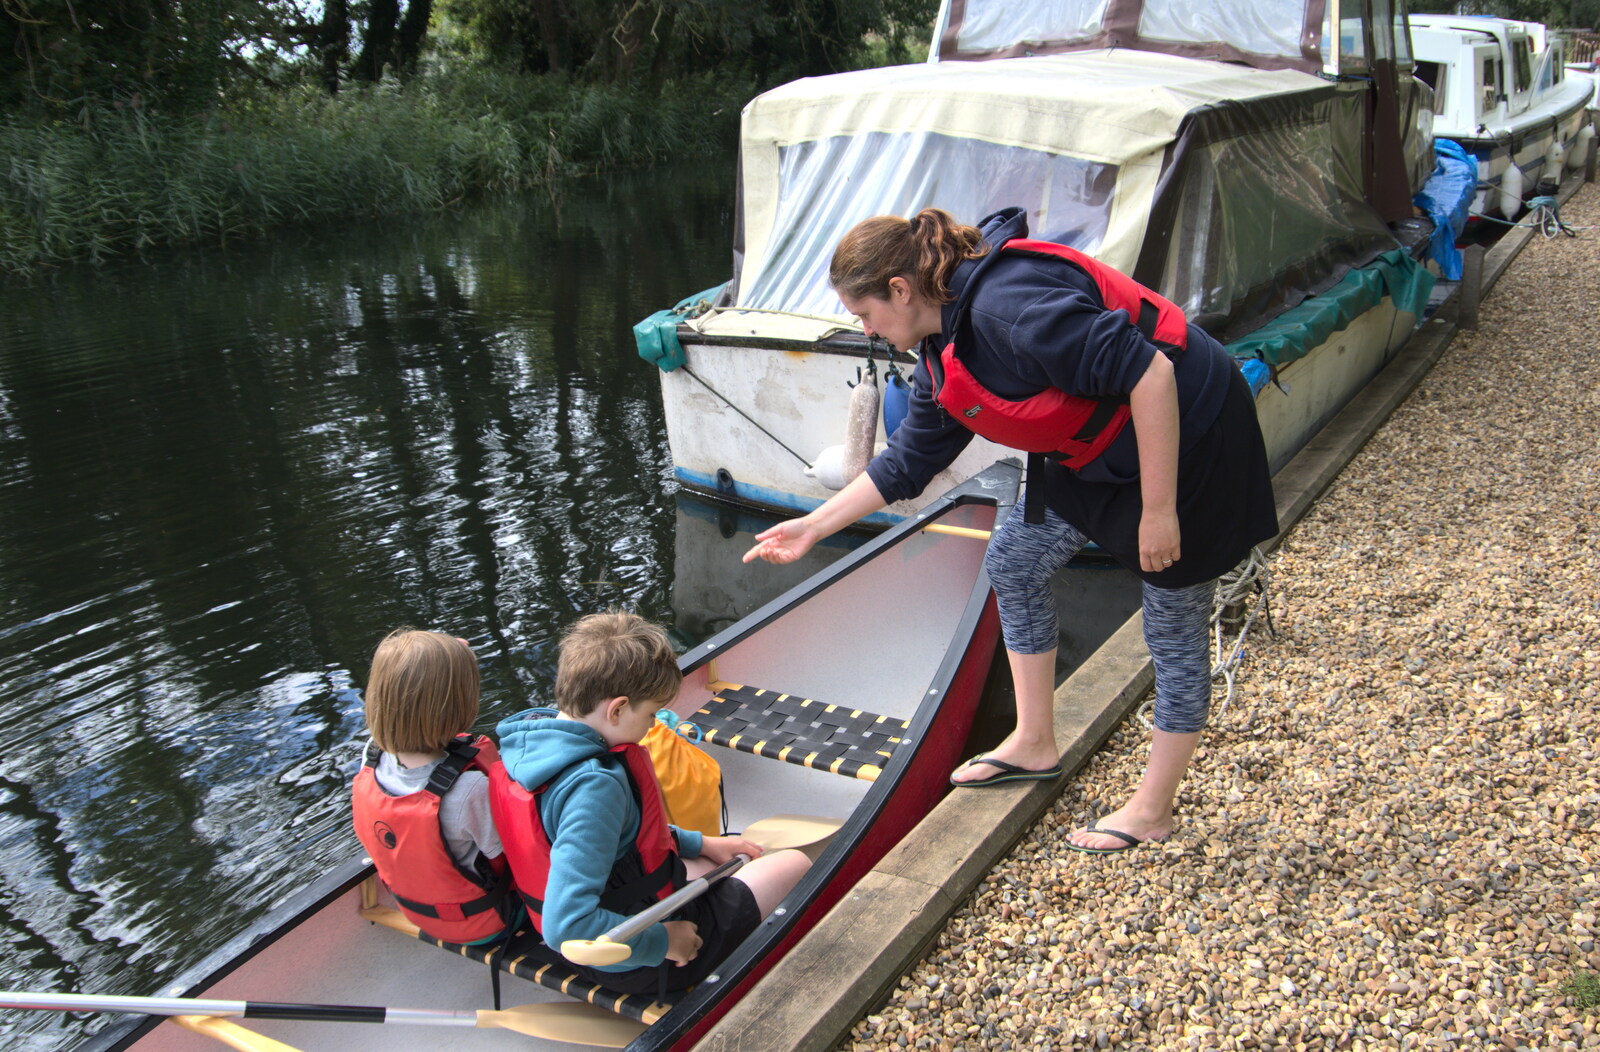 Camping at Three Rivers, Geldeston, Norfolk - 5th September 2020: Benson and Fred are back in the canoe